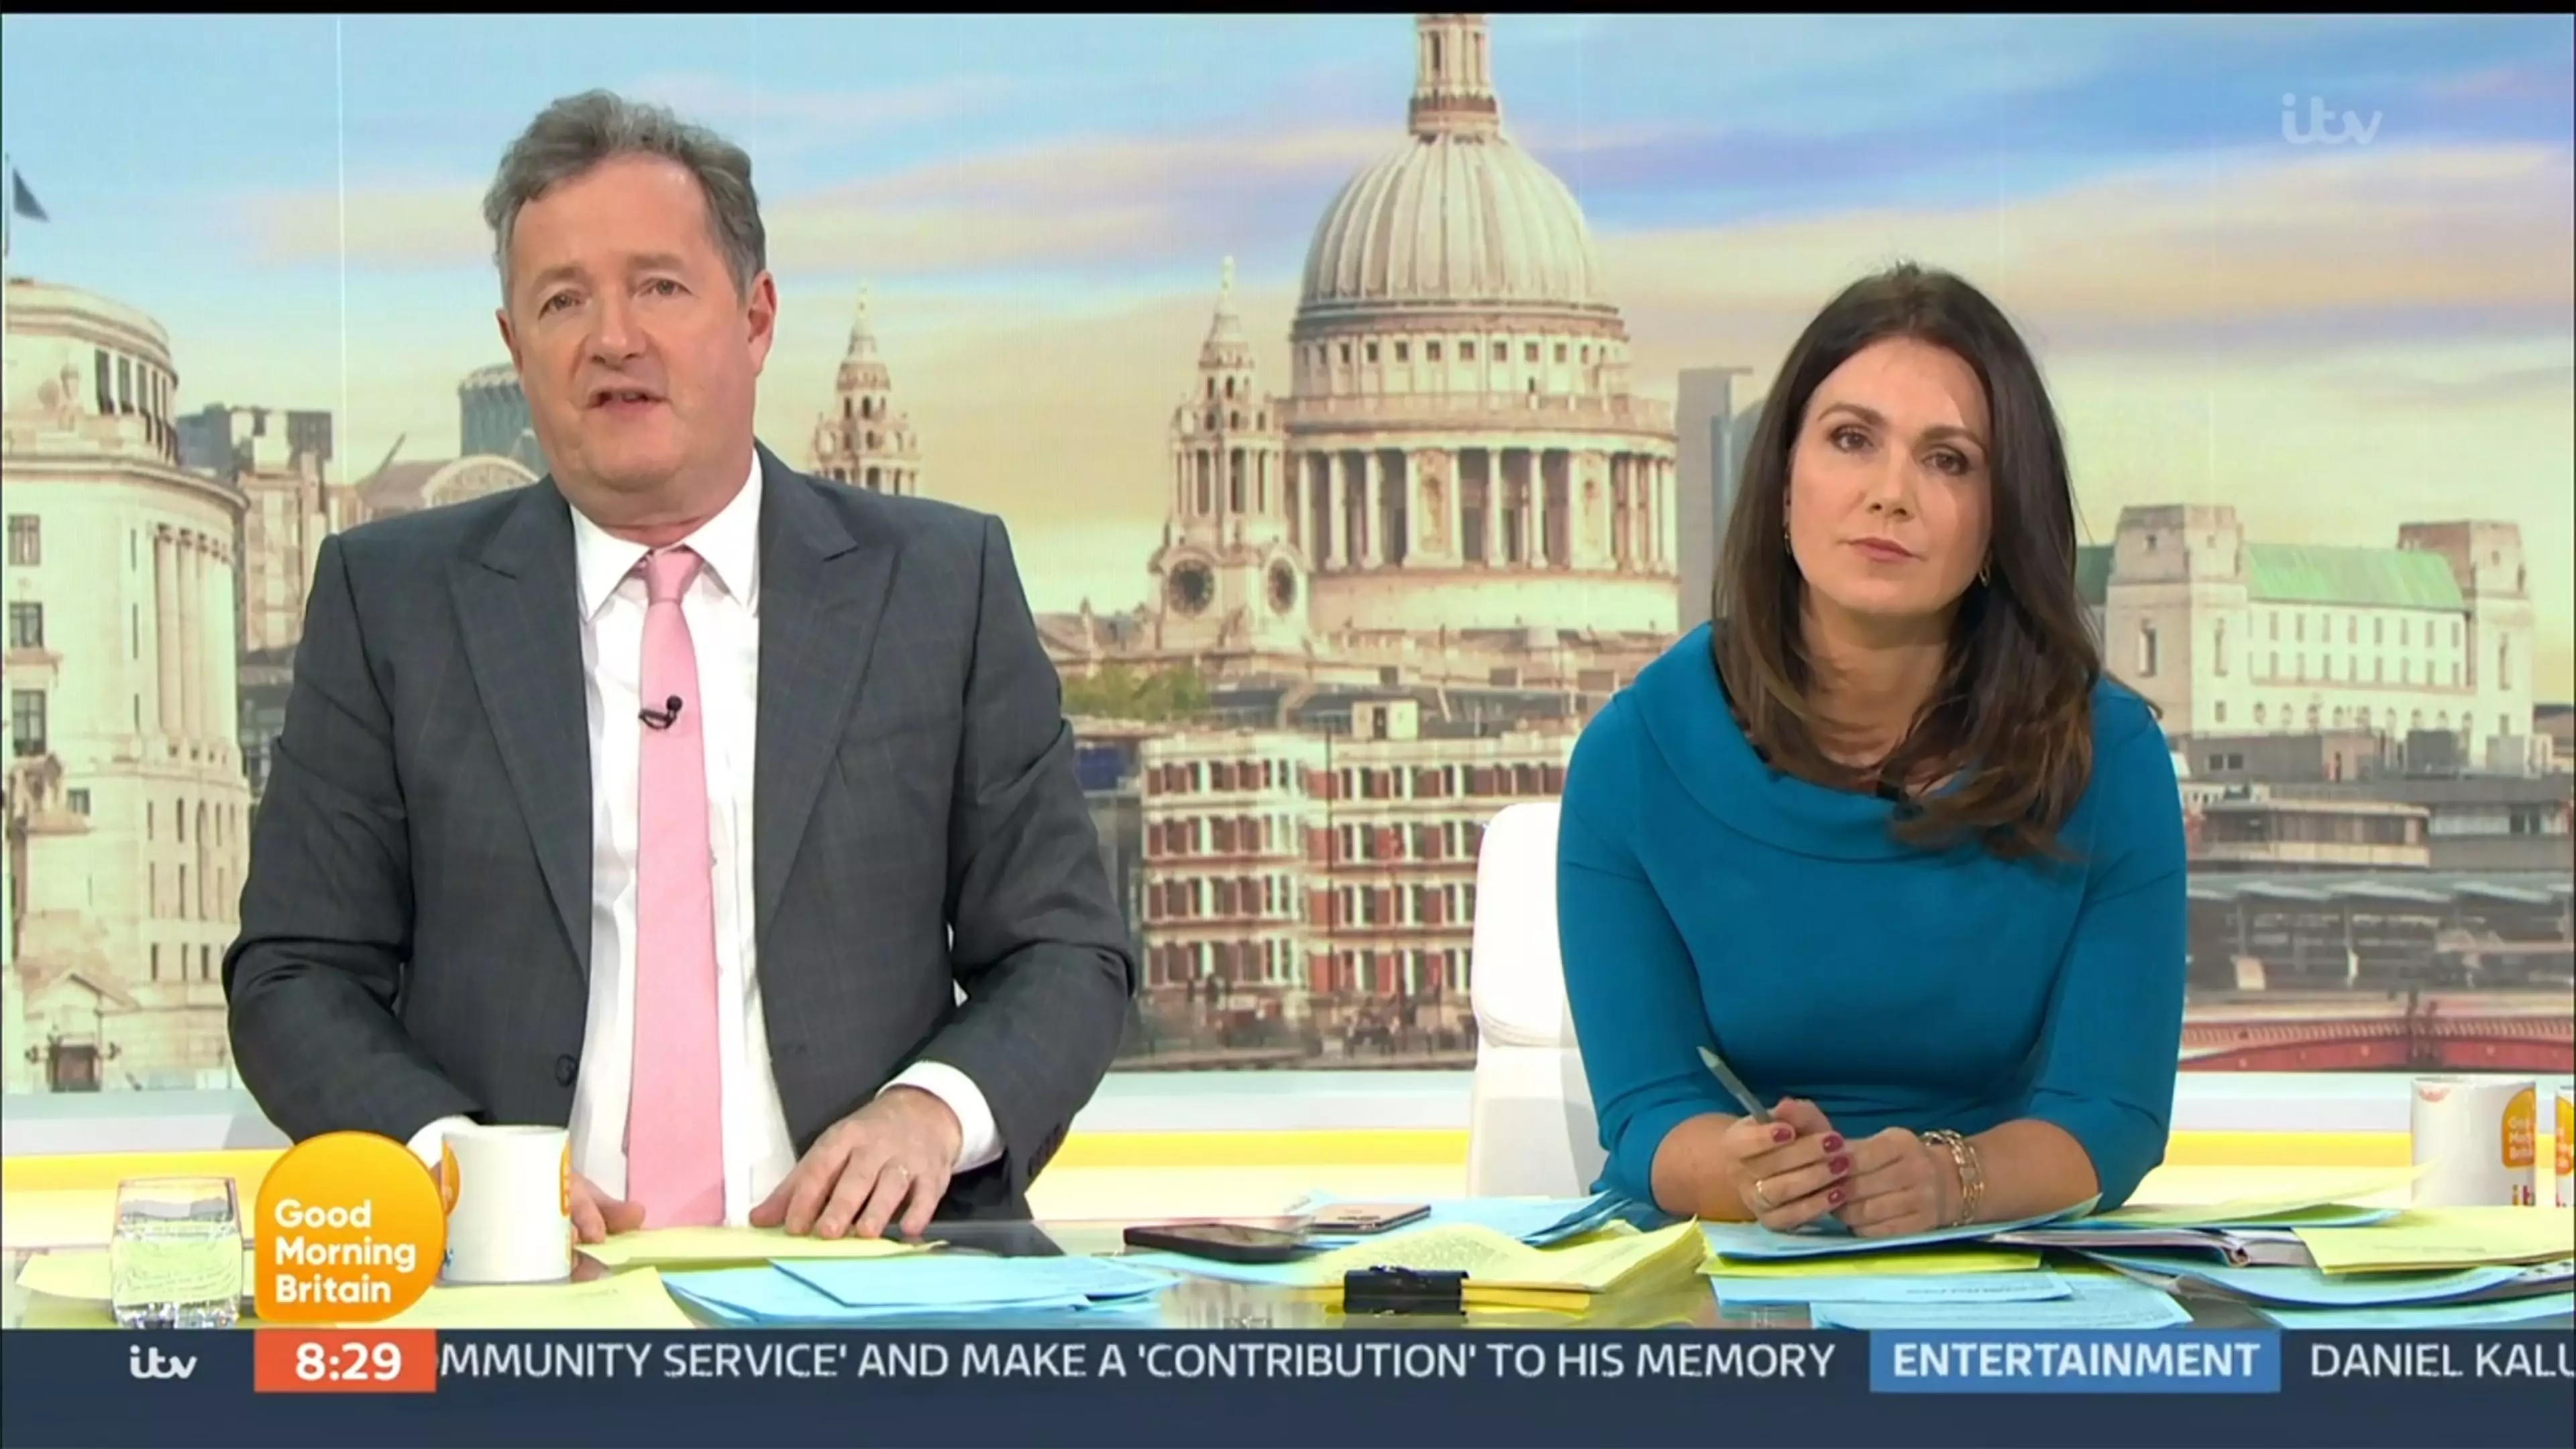 ITV announced Piers Morgan would leave Good Morning Britain immediately on Tuesday evening (